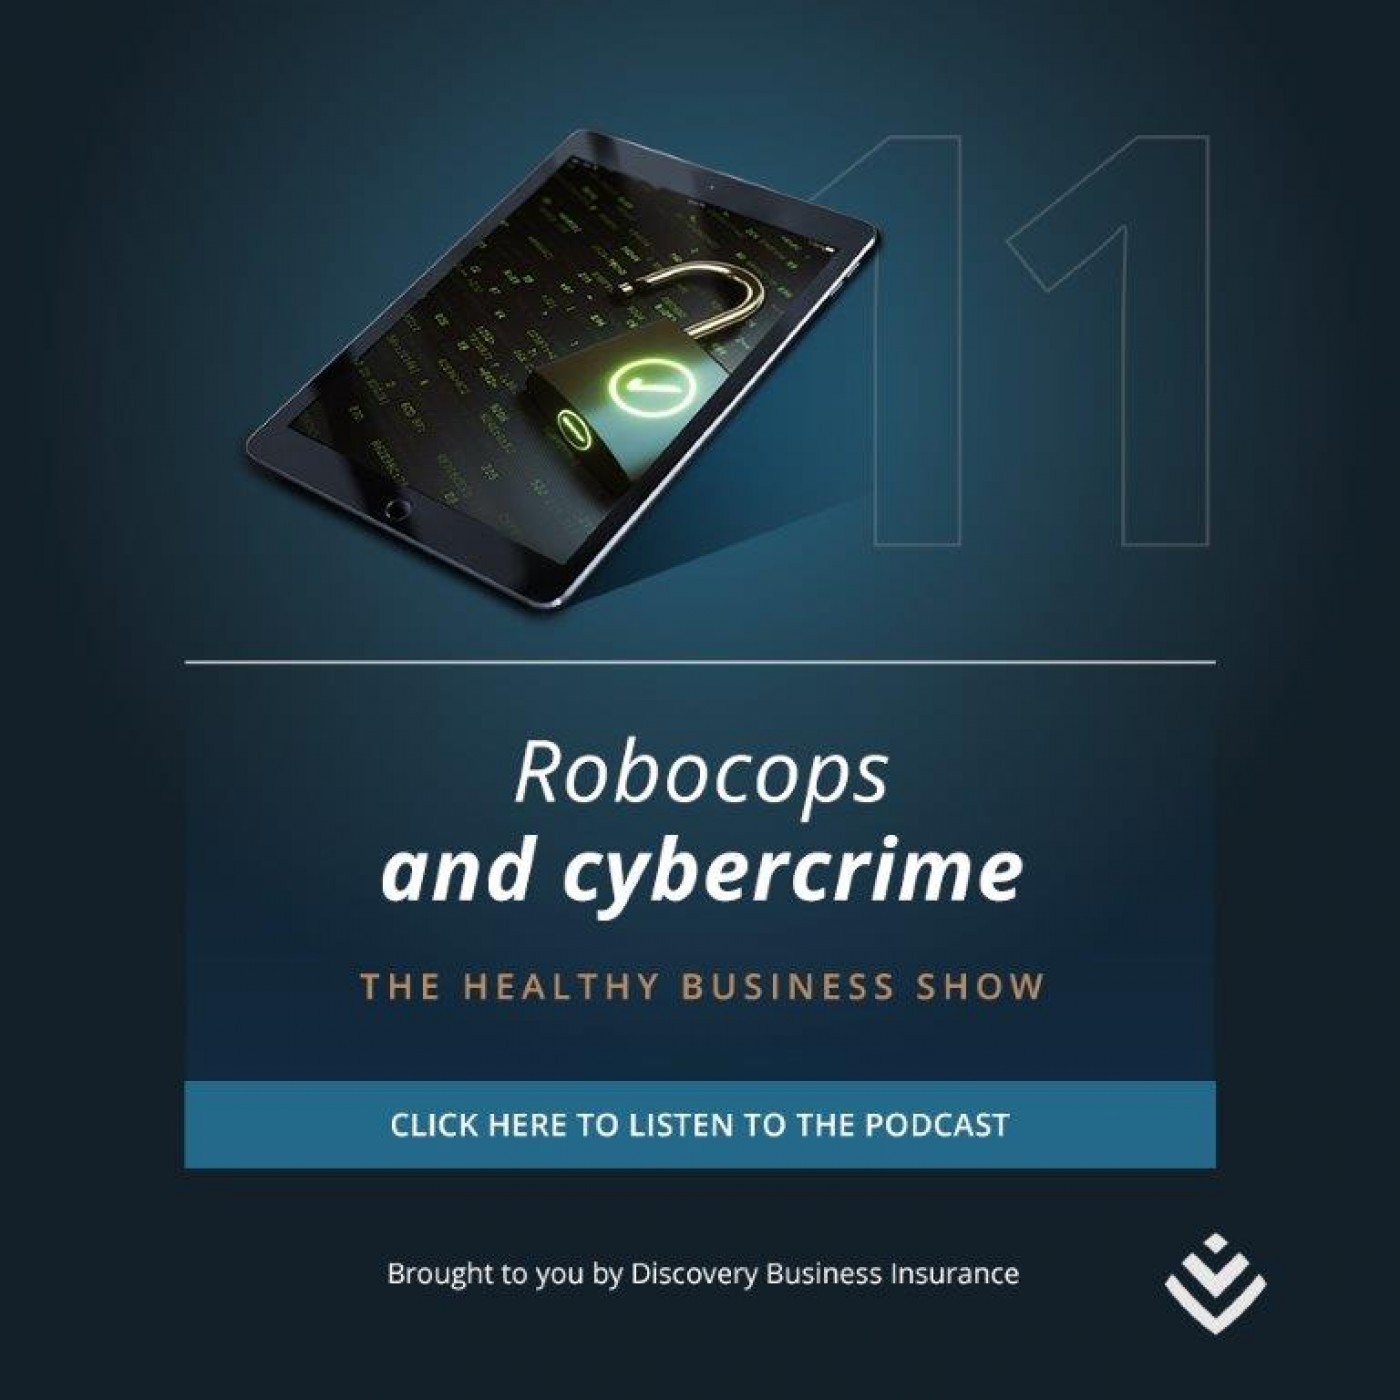 The Healthy Business Show: Robocops and cybercrime